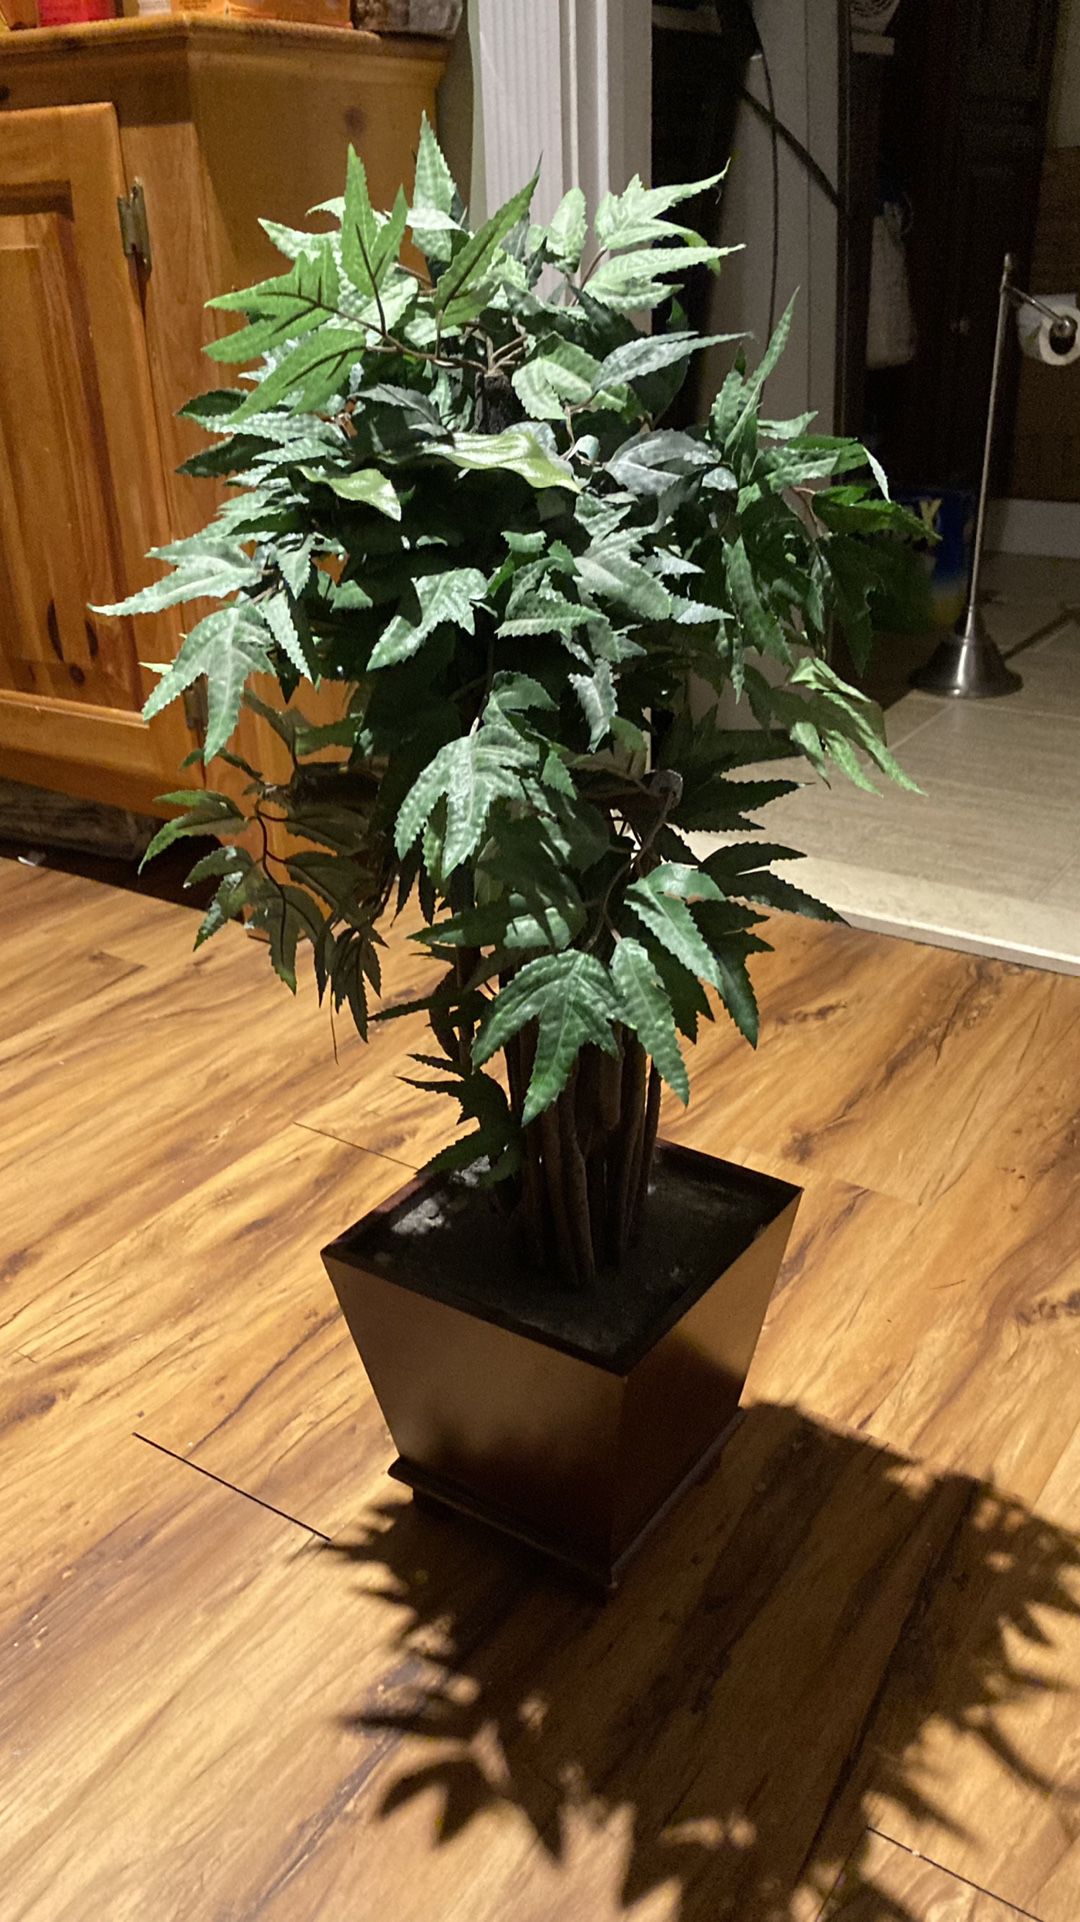 Fake plant wooden base About 24 inches tall and about 10 inches wide from a cleaning smoke free